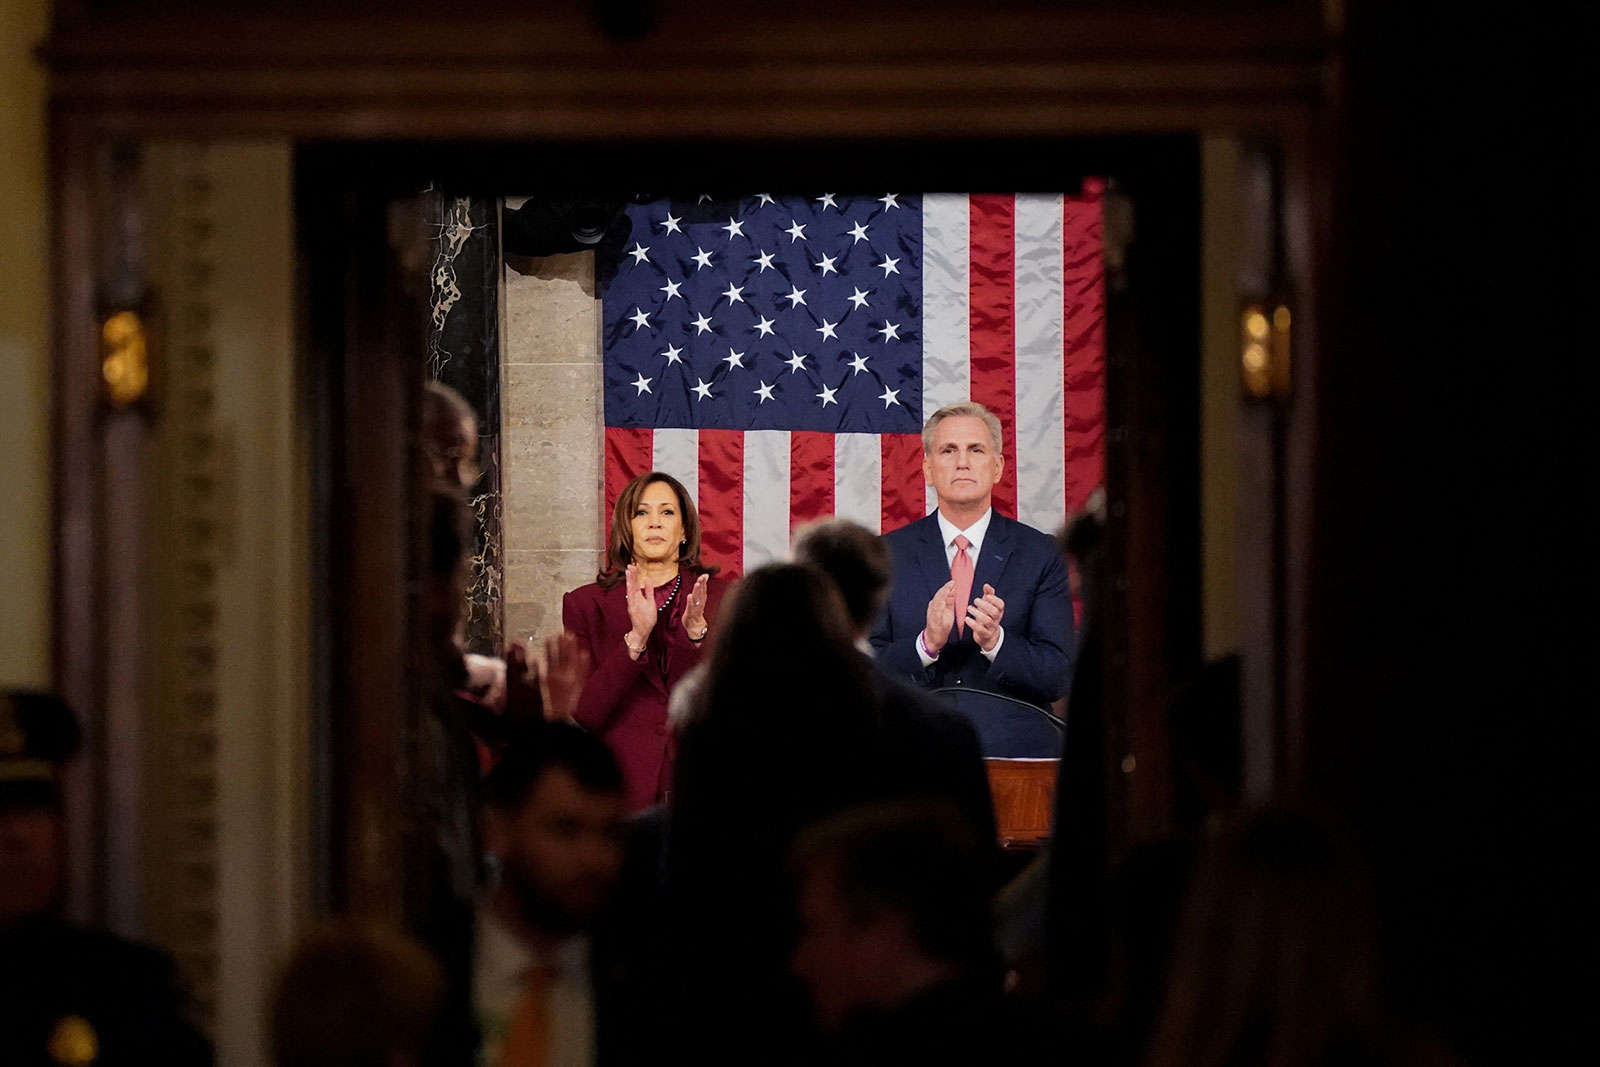 Vice President Kamala Harris and Speaker of the House Kevin McCarthy clap as people enter the House chamber ahead of Biden's speech.